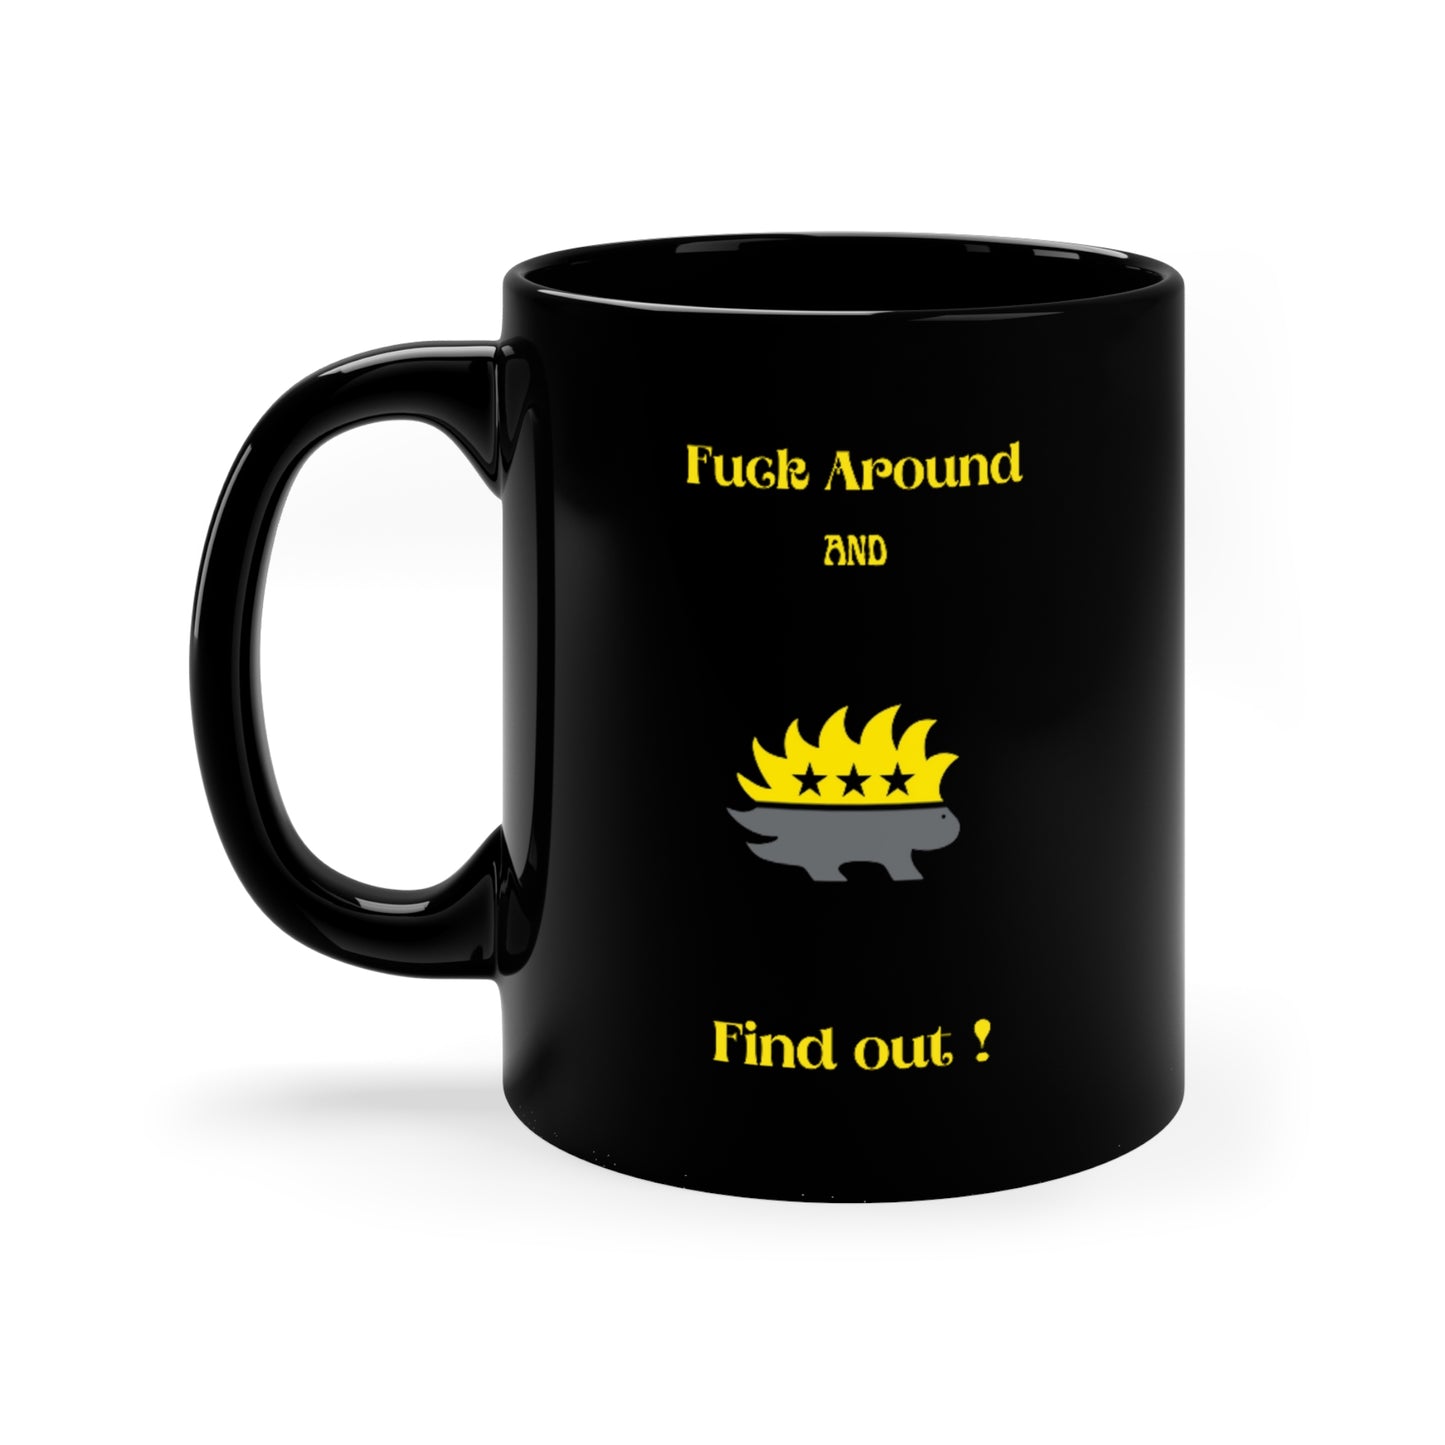 Fuck Around And Find Out! 11oz Black Mug